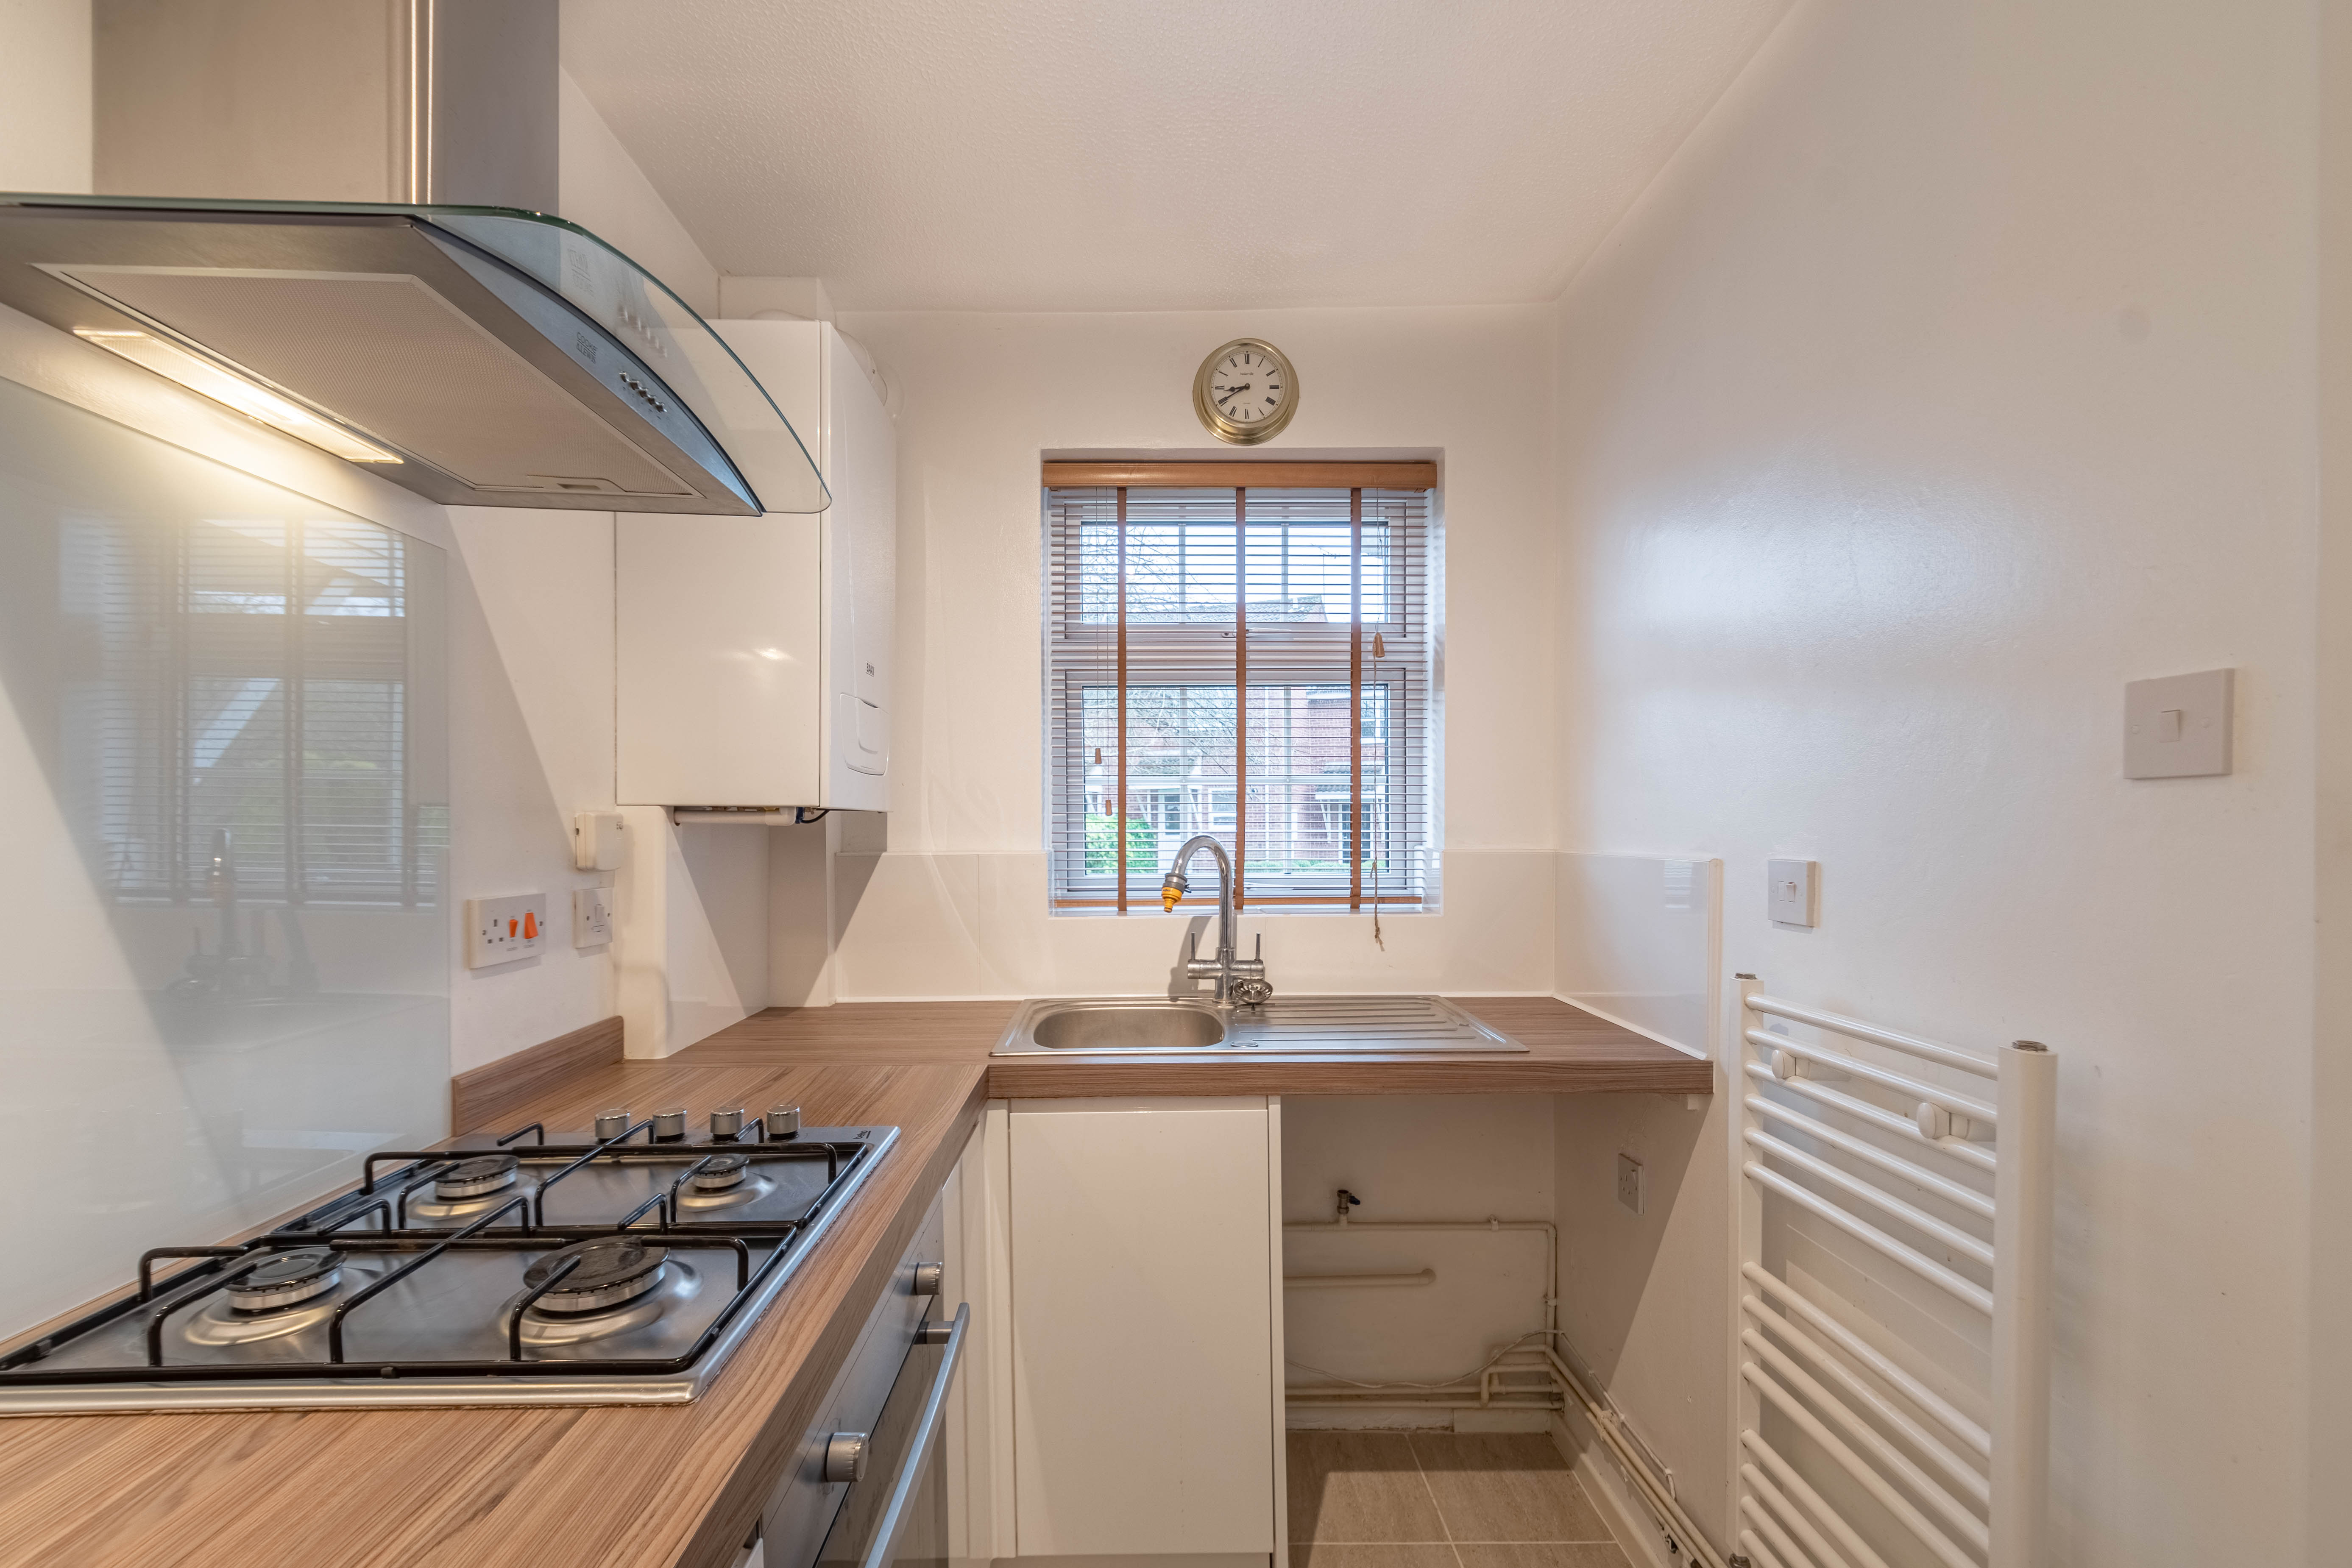 2 bed house for sale in Abbotswood Close, Winyates Green 3